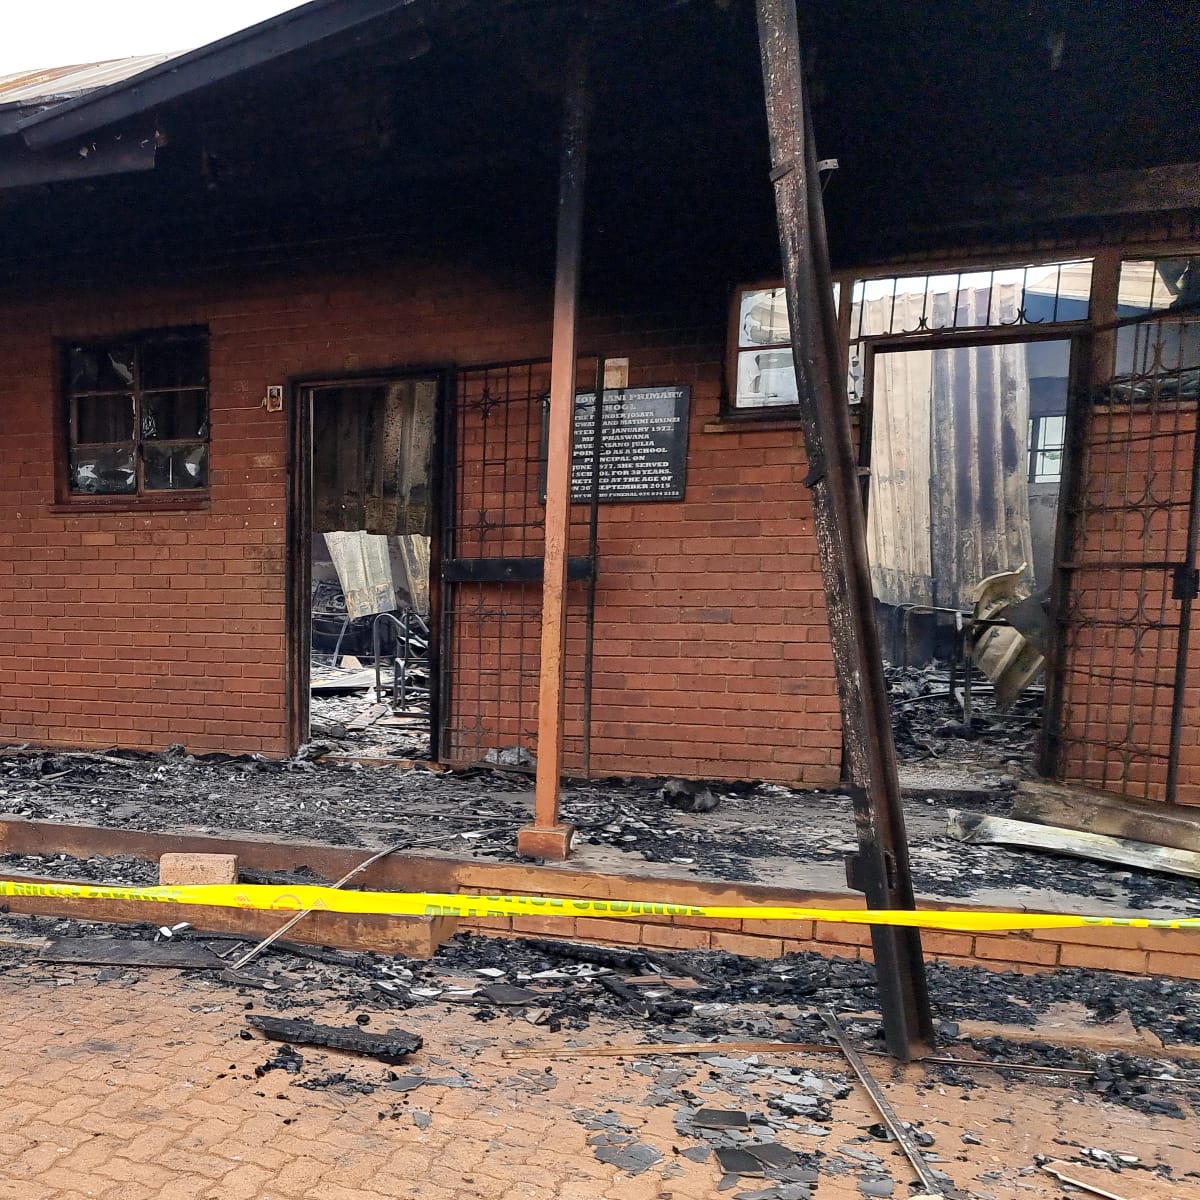 As learners prepare for the Monday exam, their school set alight